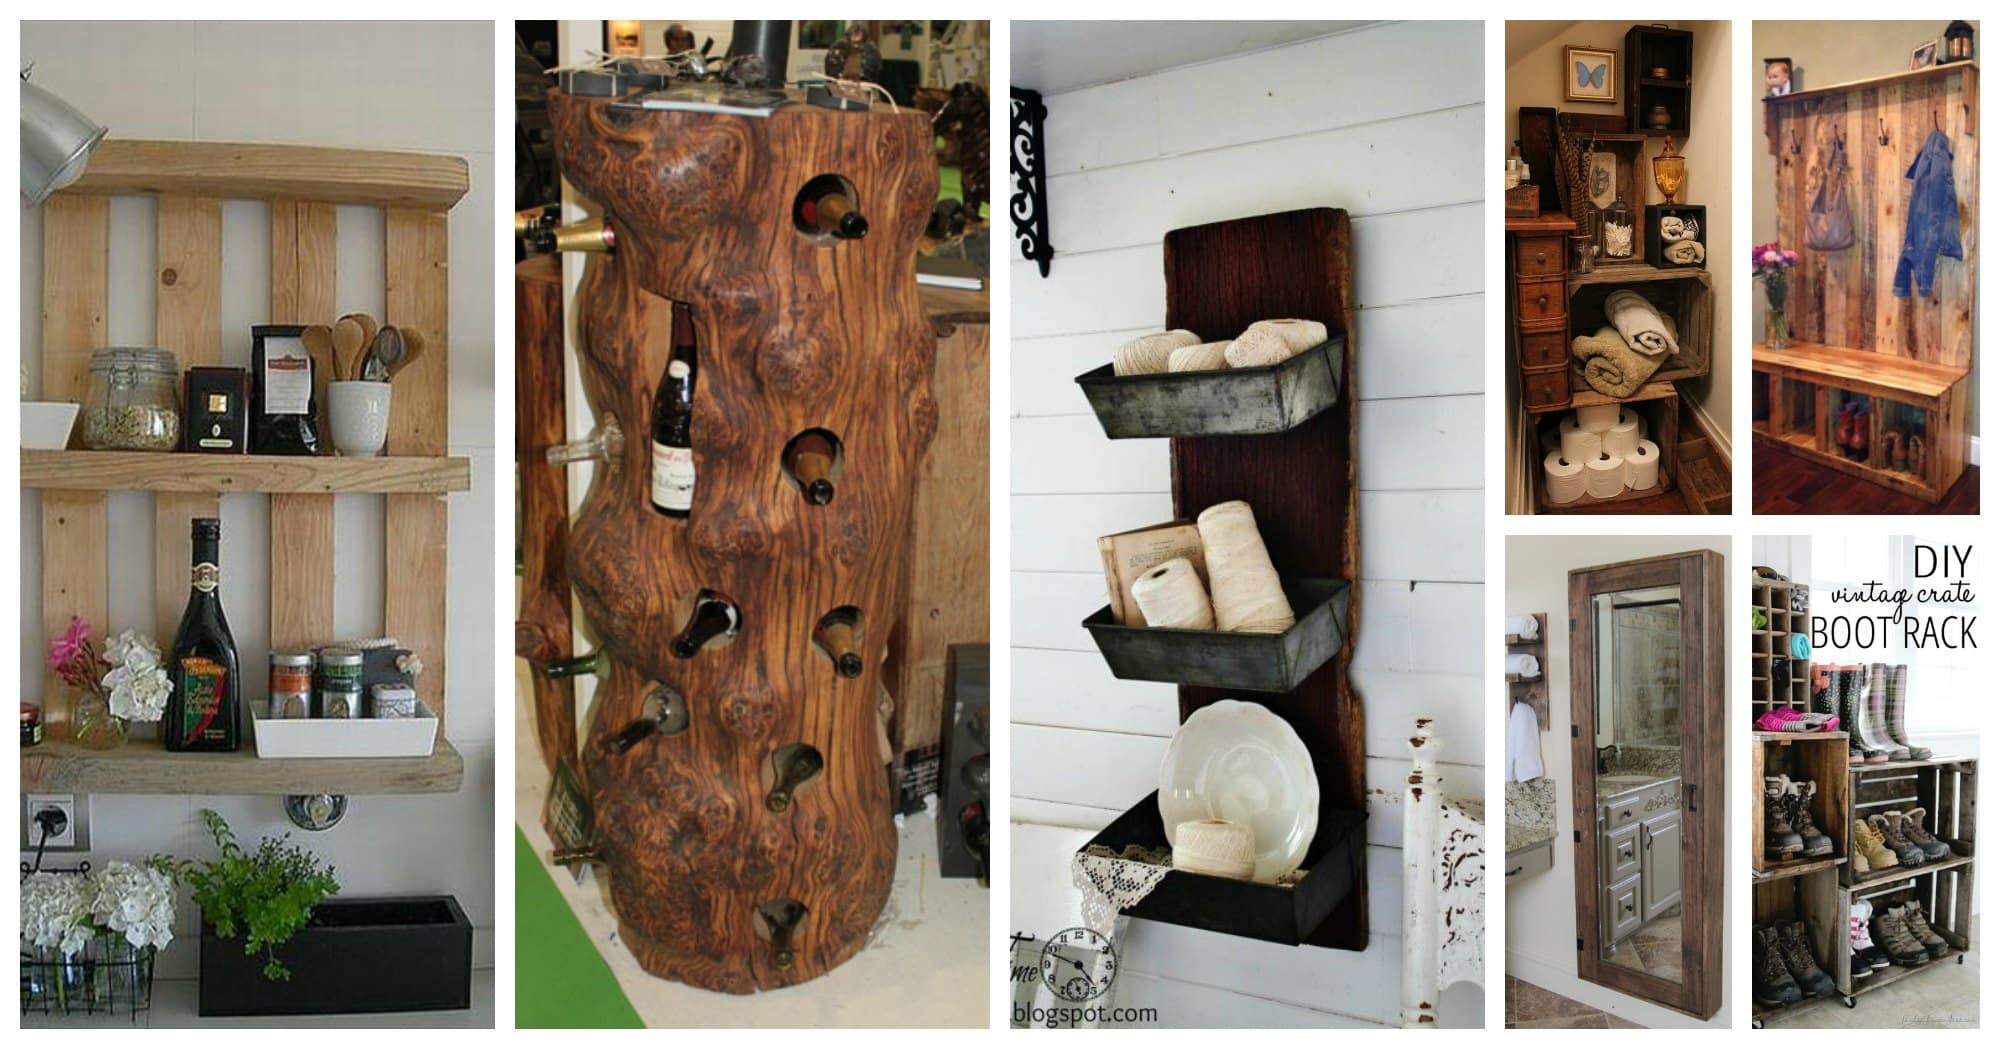 Rustic Storage Projects